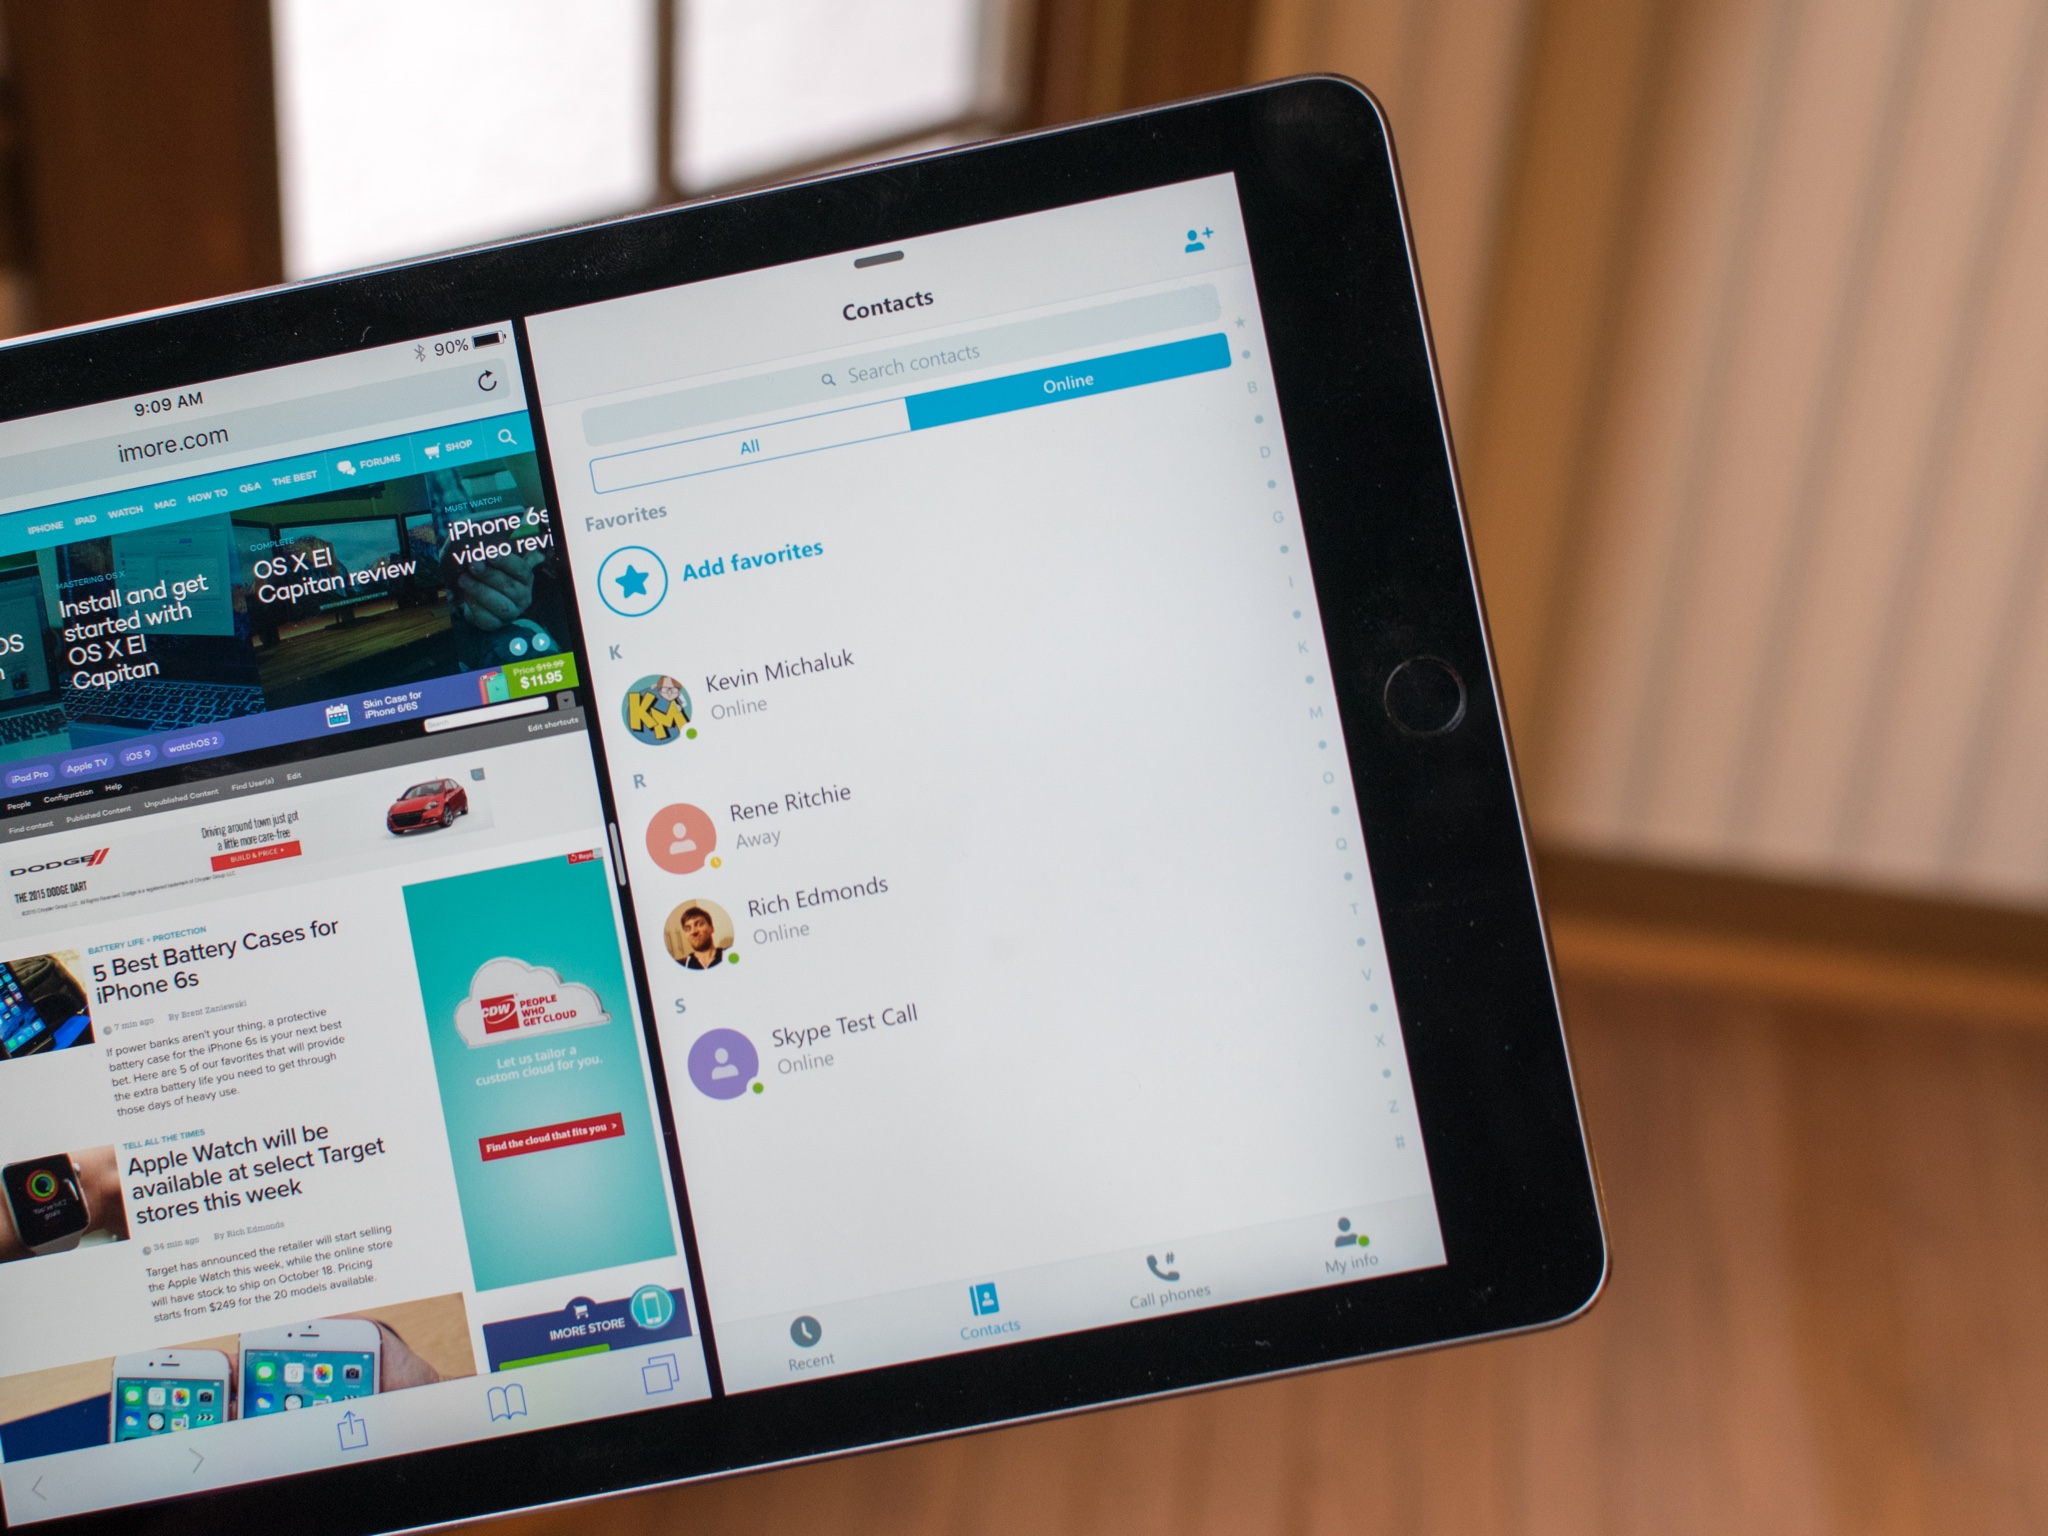 Skype for iPhone and iPad pick up iOS 9 support with quick replies, Spotlight search, and more